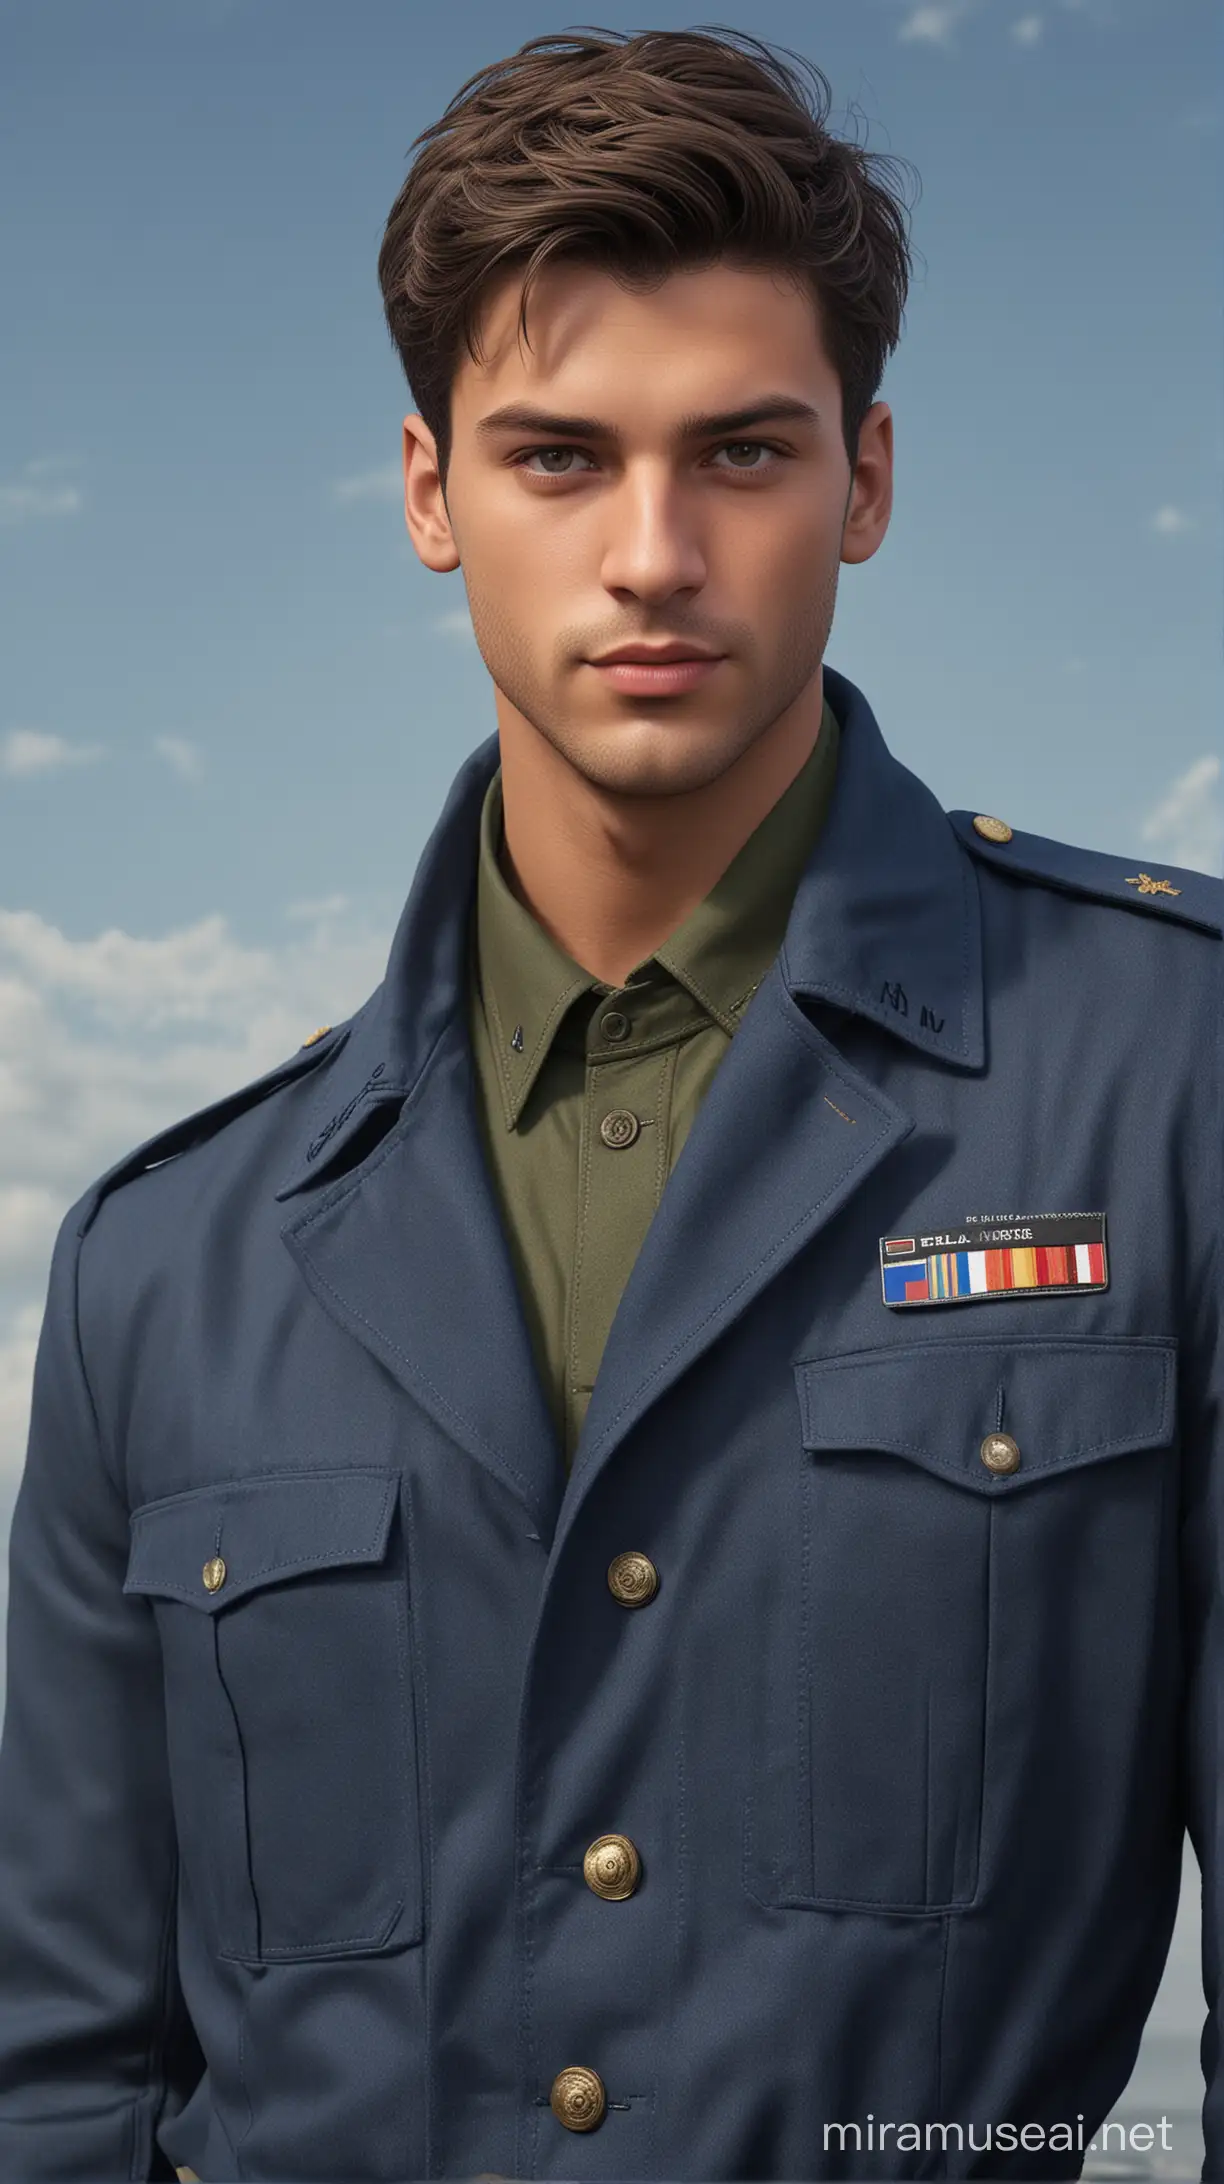 Prince Filippo in Germanys Navy Air Force Uniform at Sea